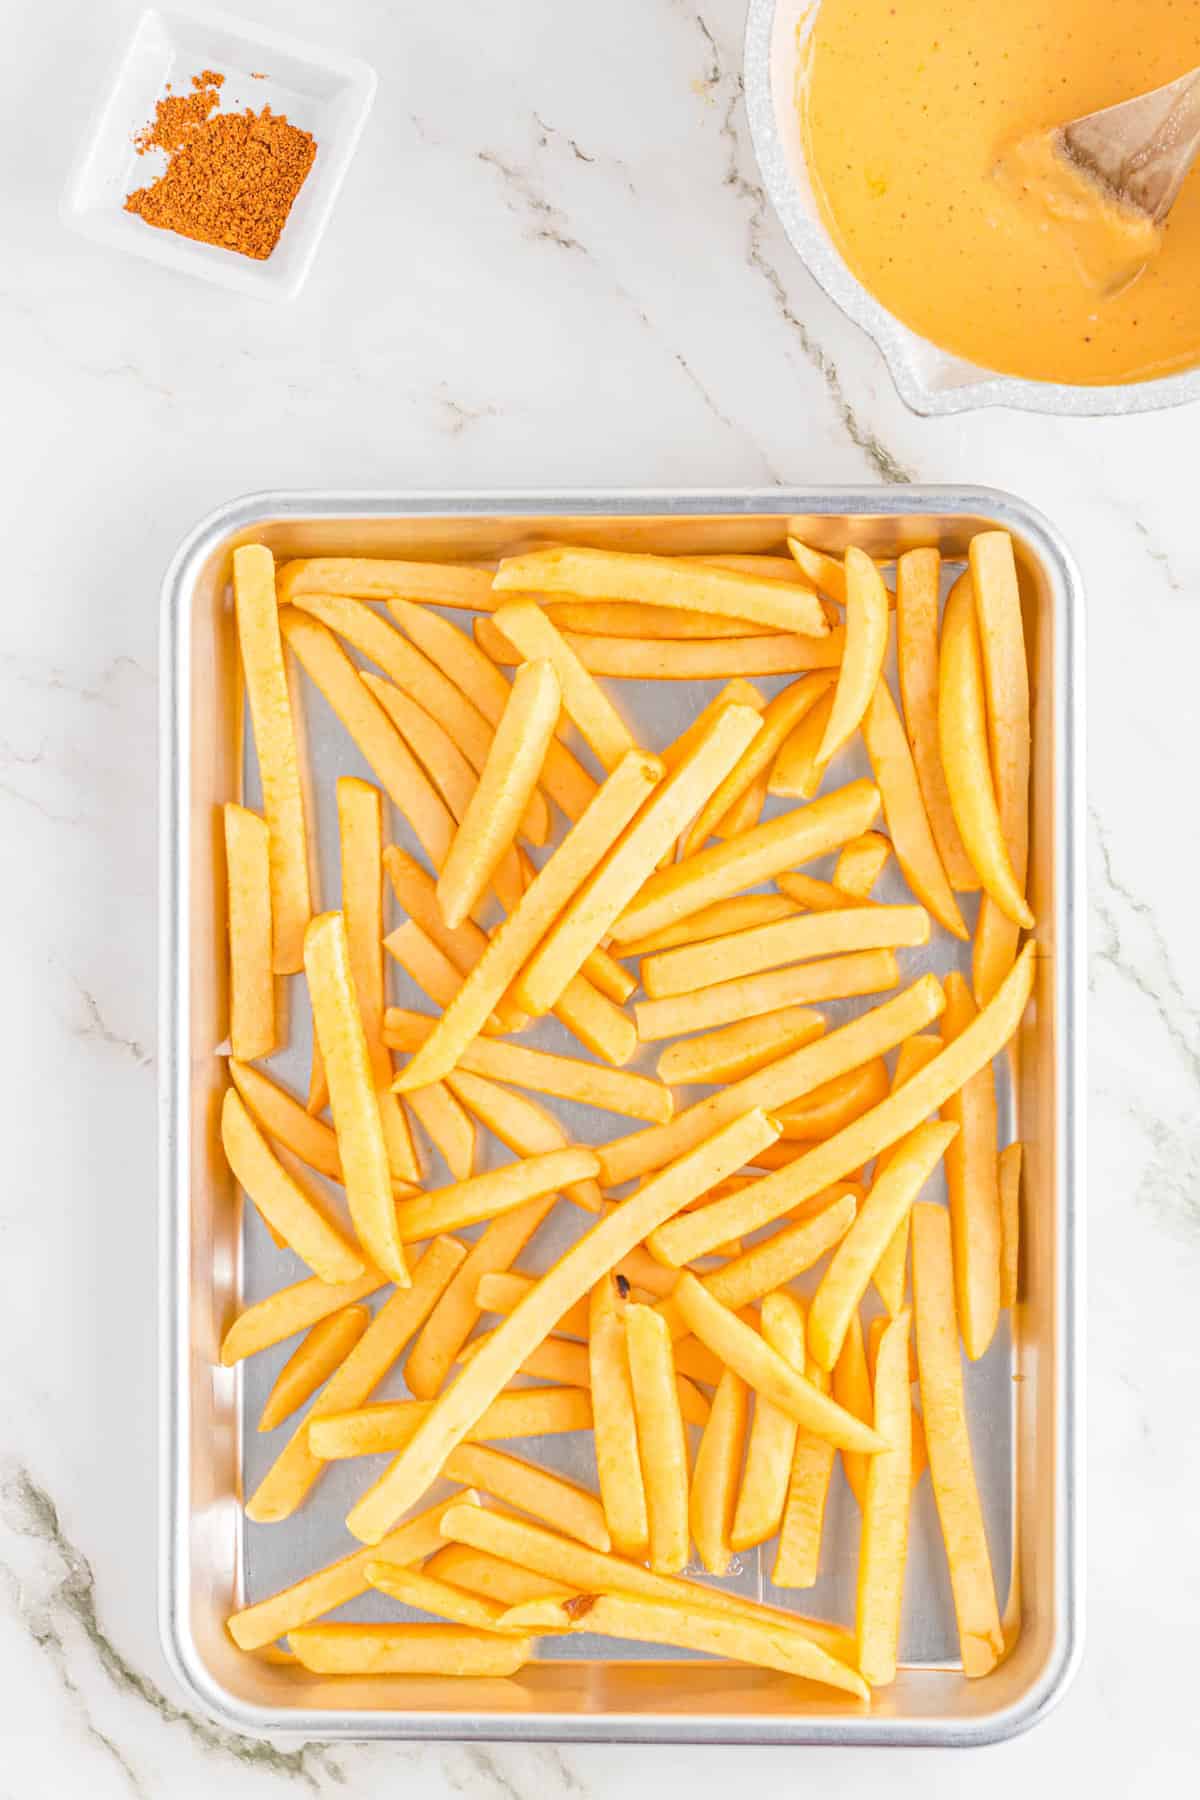 Filling Baking Sheet with Fries for Nacho Fries Recipe